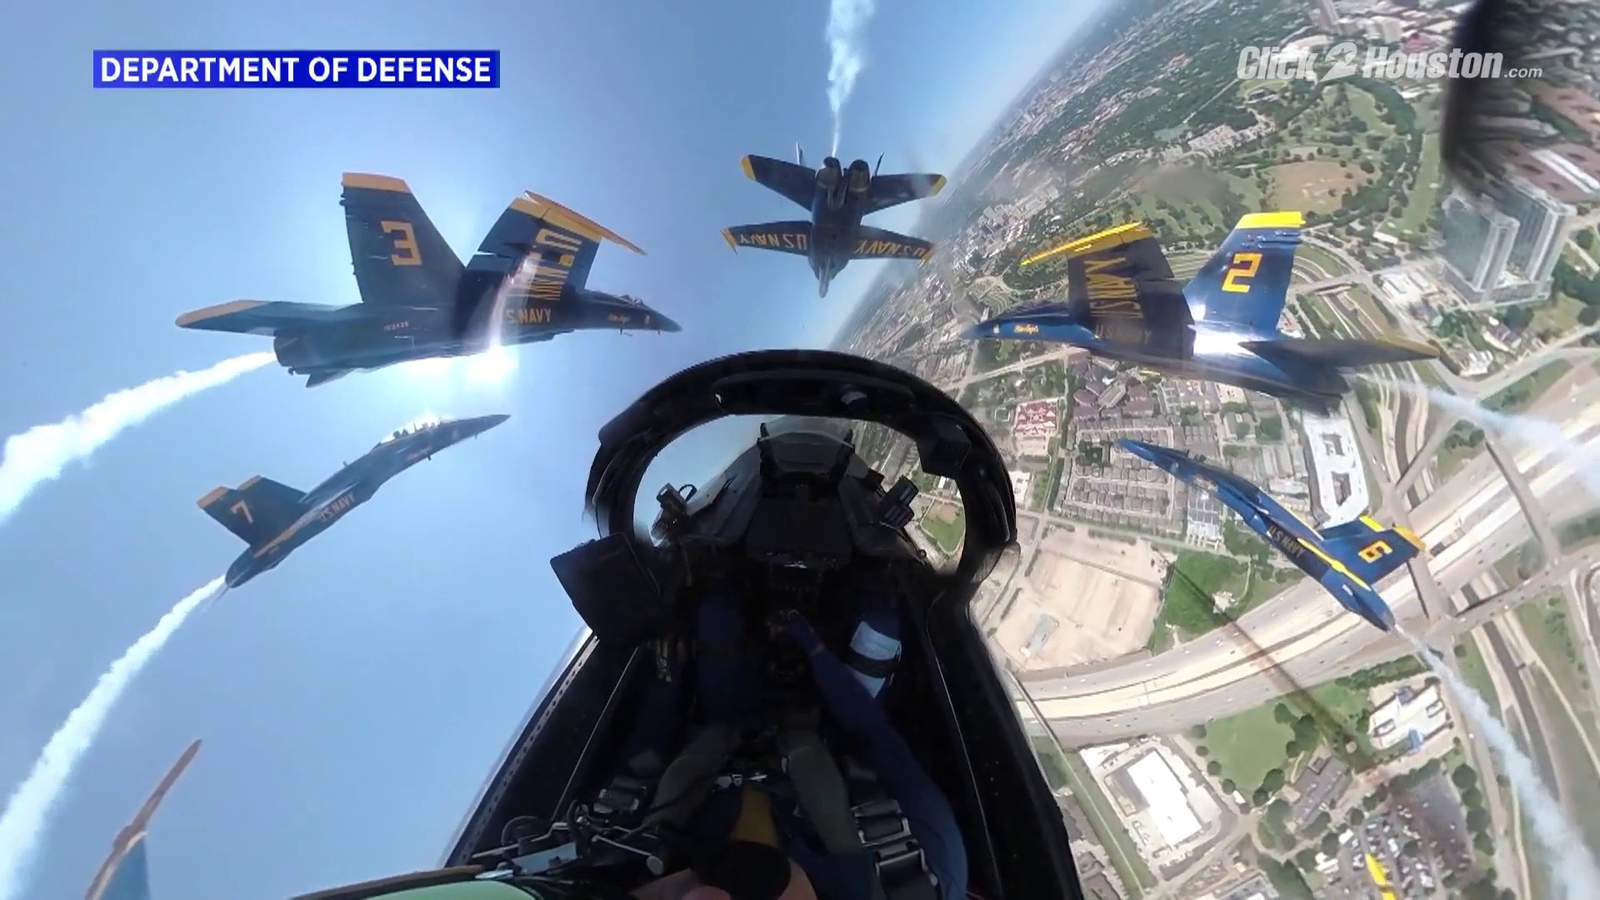 UNREAL! This video shows the view from inside one of the Blue Angels’ jets flying over Houston